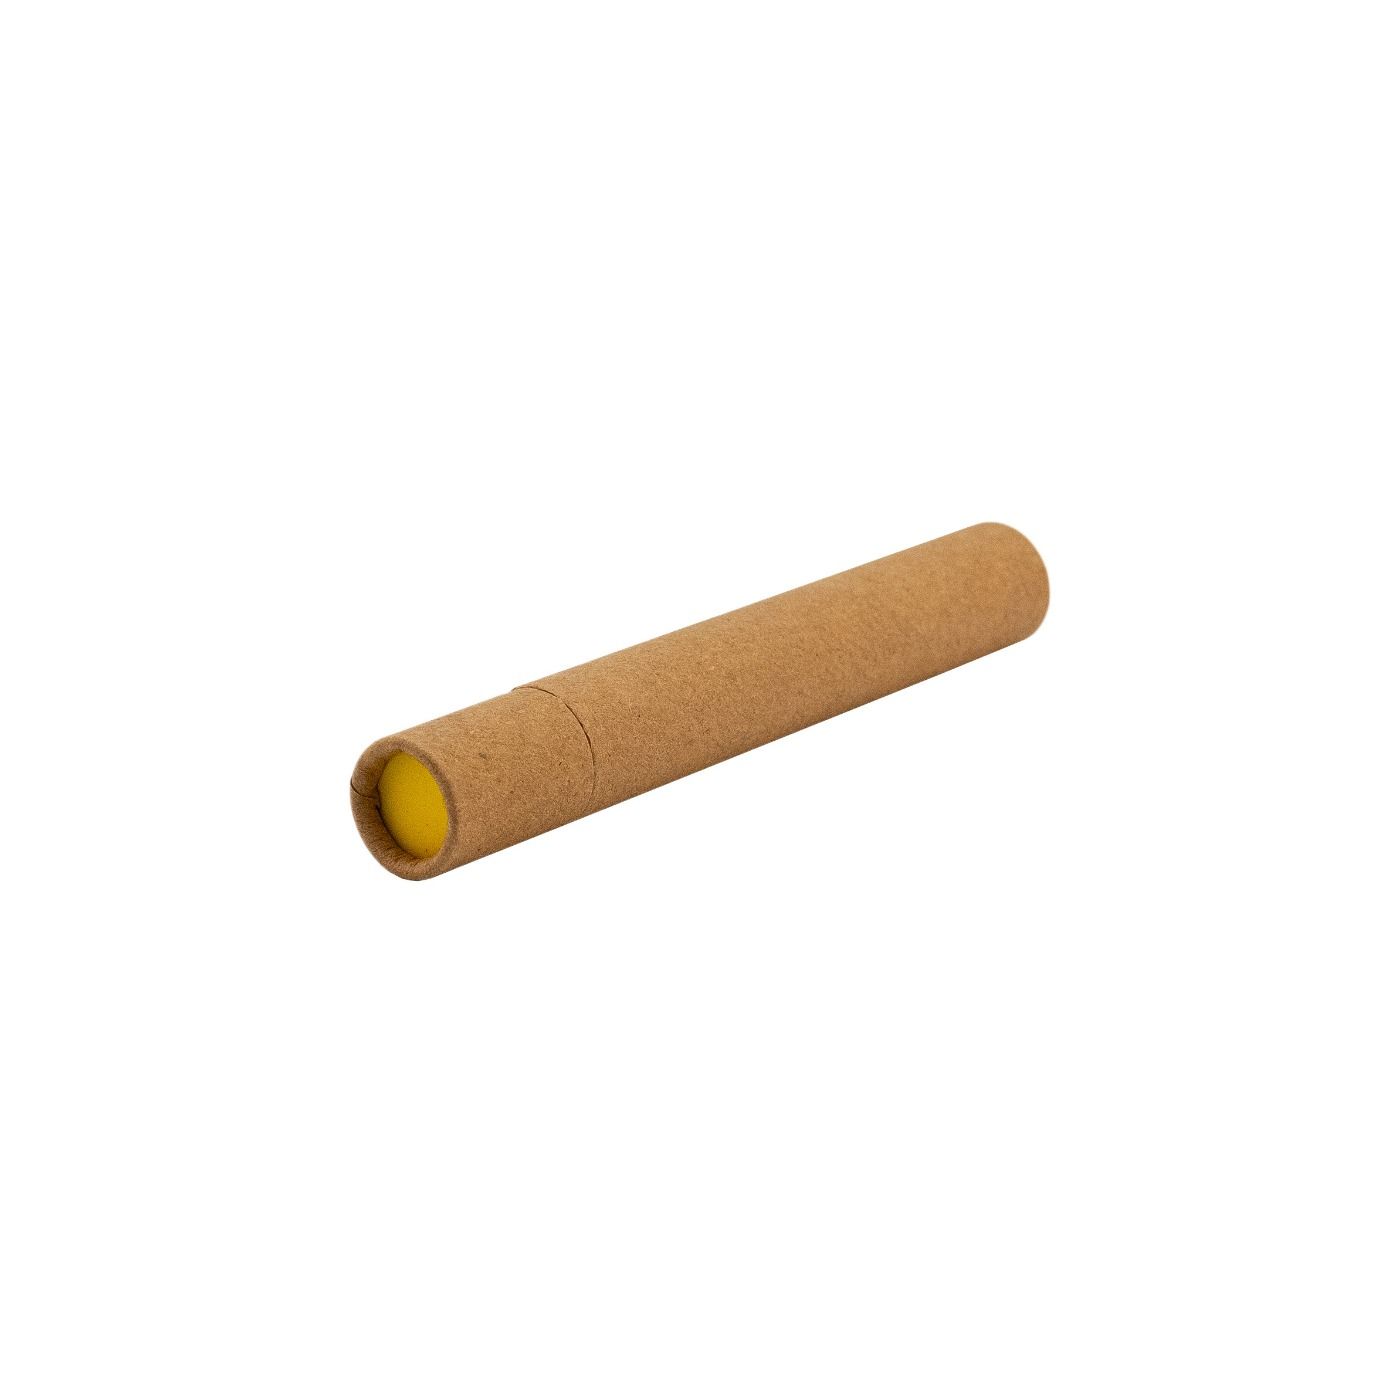 527401-YELLOW -PAPER-JOINT-TUBES-120MM-YELLOW-250PCS